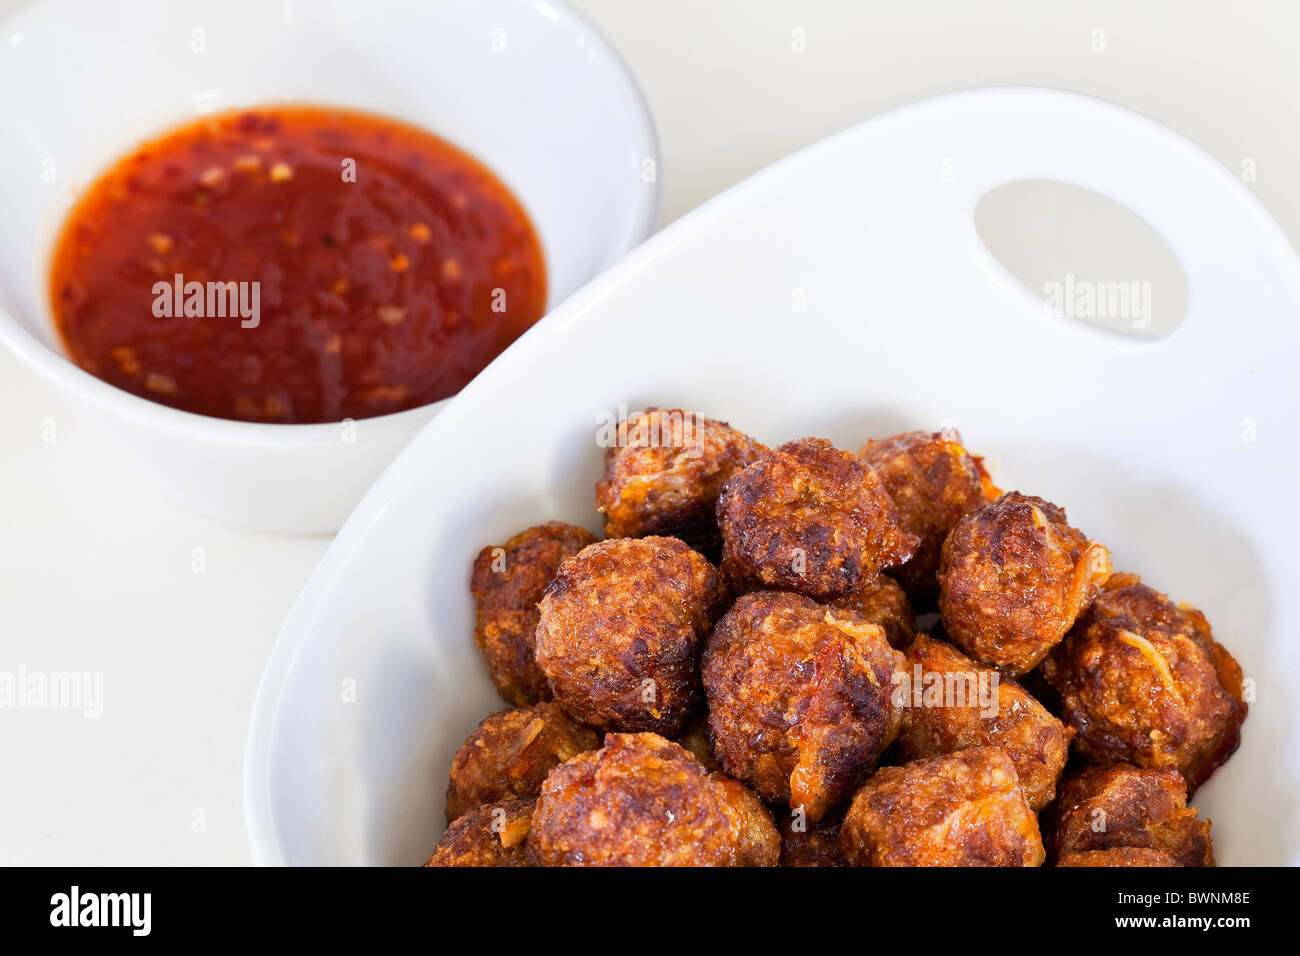 Spicy meatballs and a hot sauce, appetizer. Stock Photo